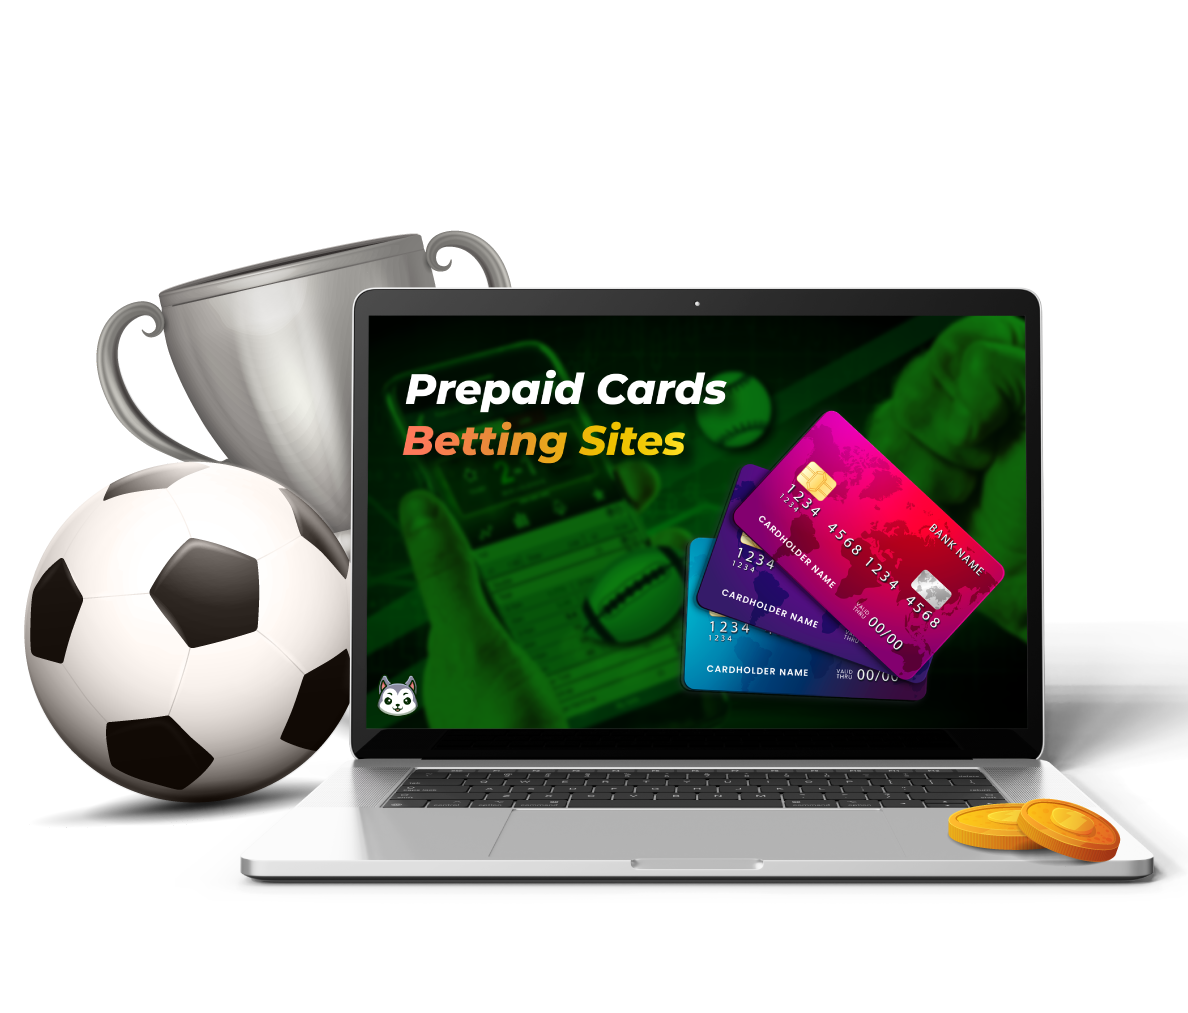 Prepaid Cards Betting Sites